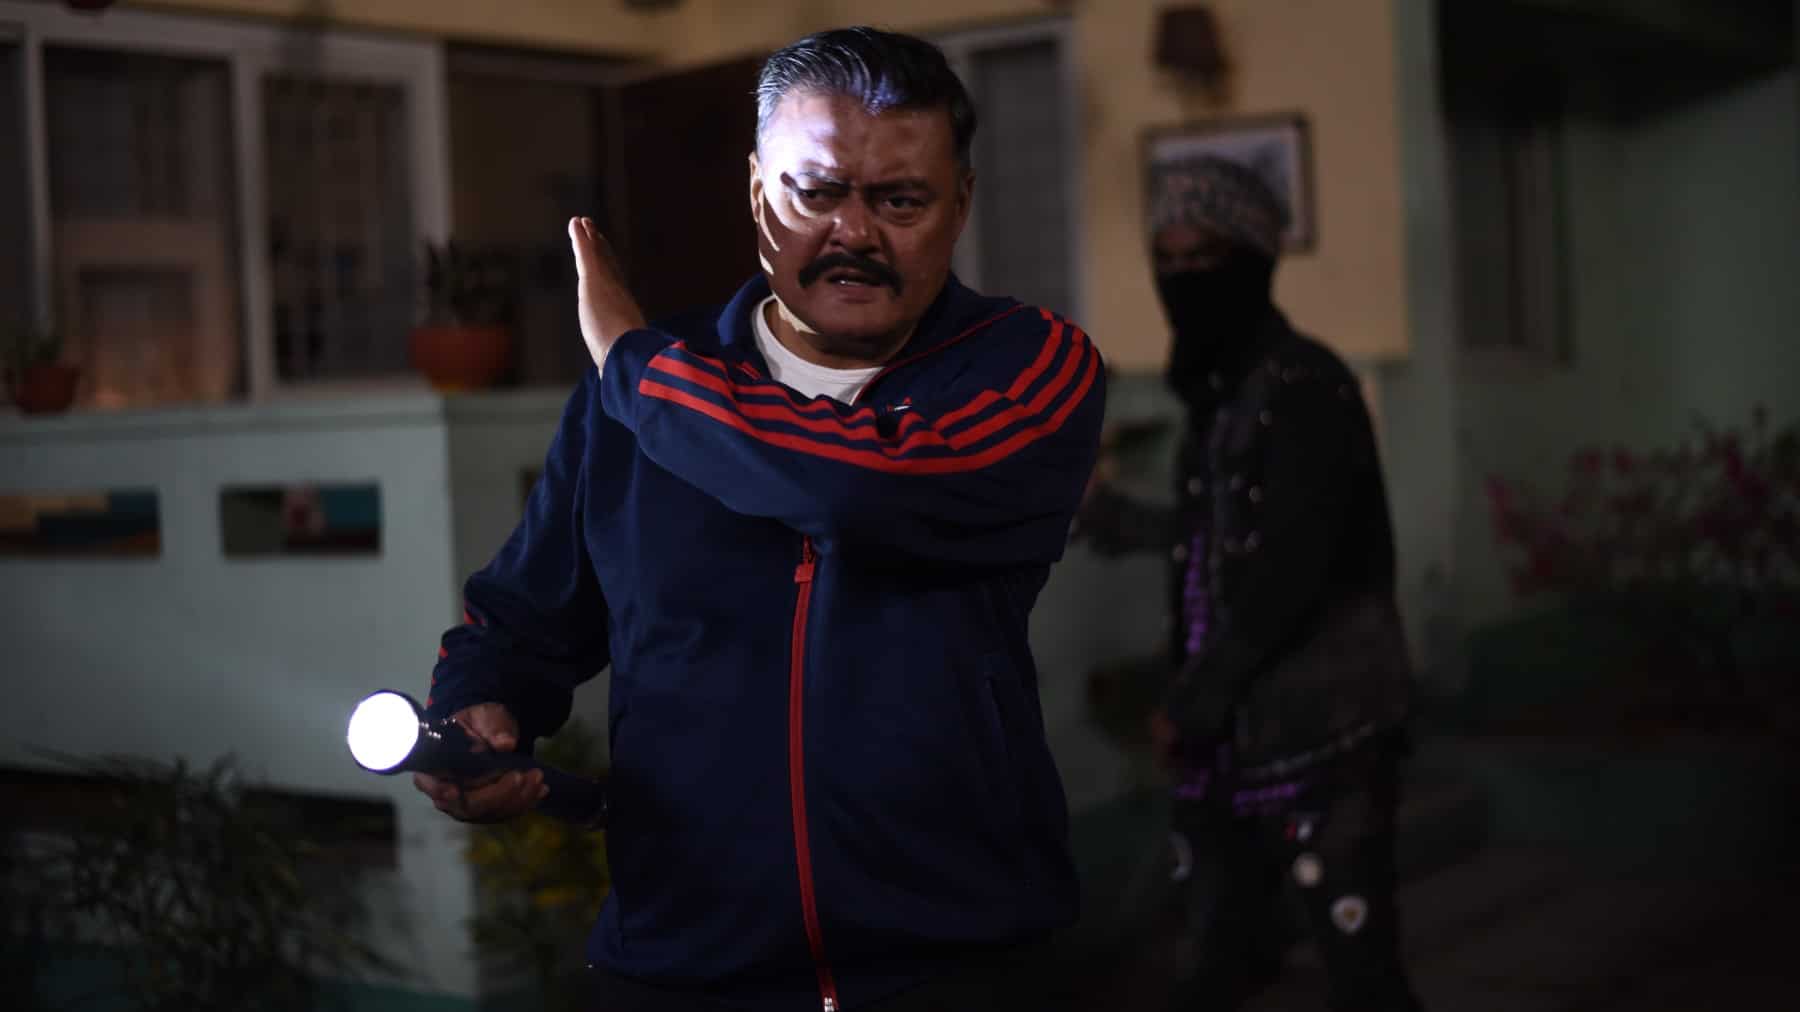 https://www.mobilemasala.com/movie-review/Abar-Proloy-review-Raj-Chakrabortys-OTT-debut-is-a-masterclass-of-entertainment-in-the-Bengali-industry-i158571